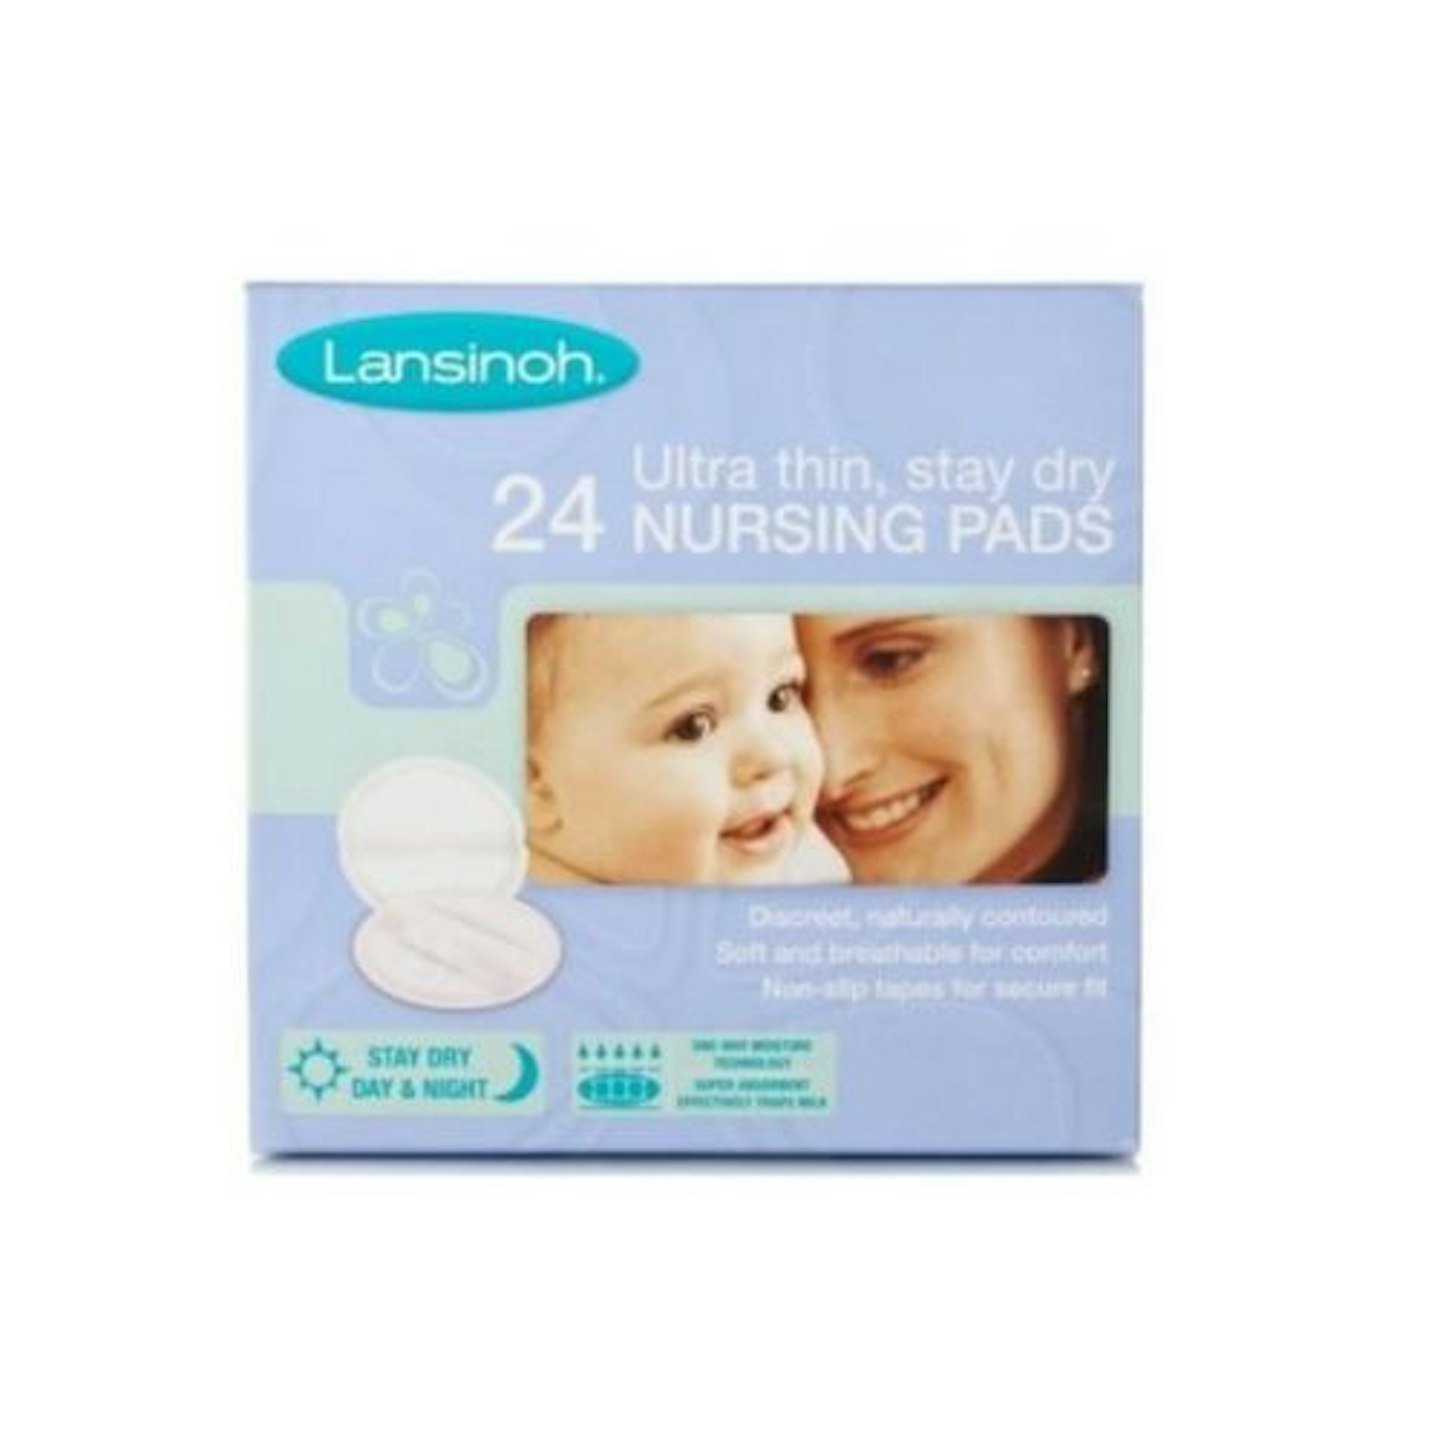 Lansinoh 24 Disposable Breast Pads - Nature's Best Pharmacy